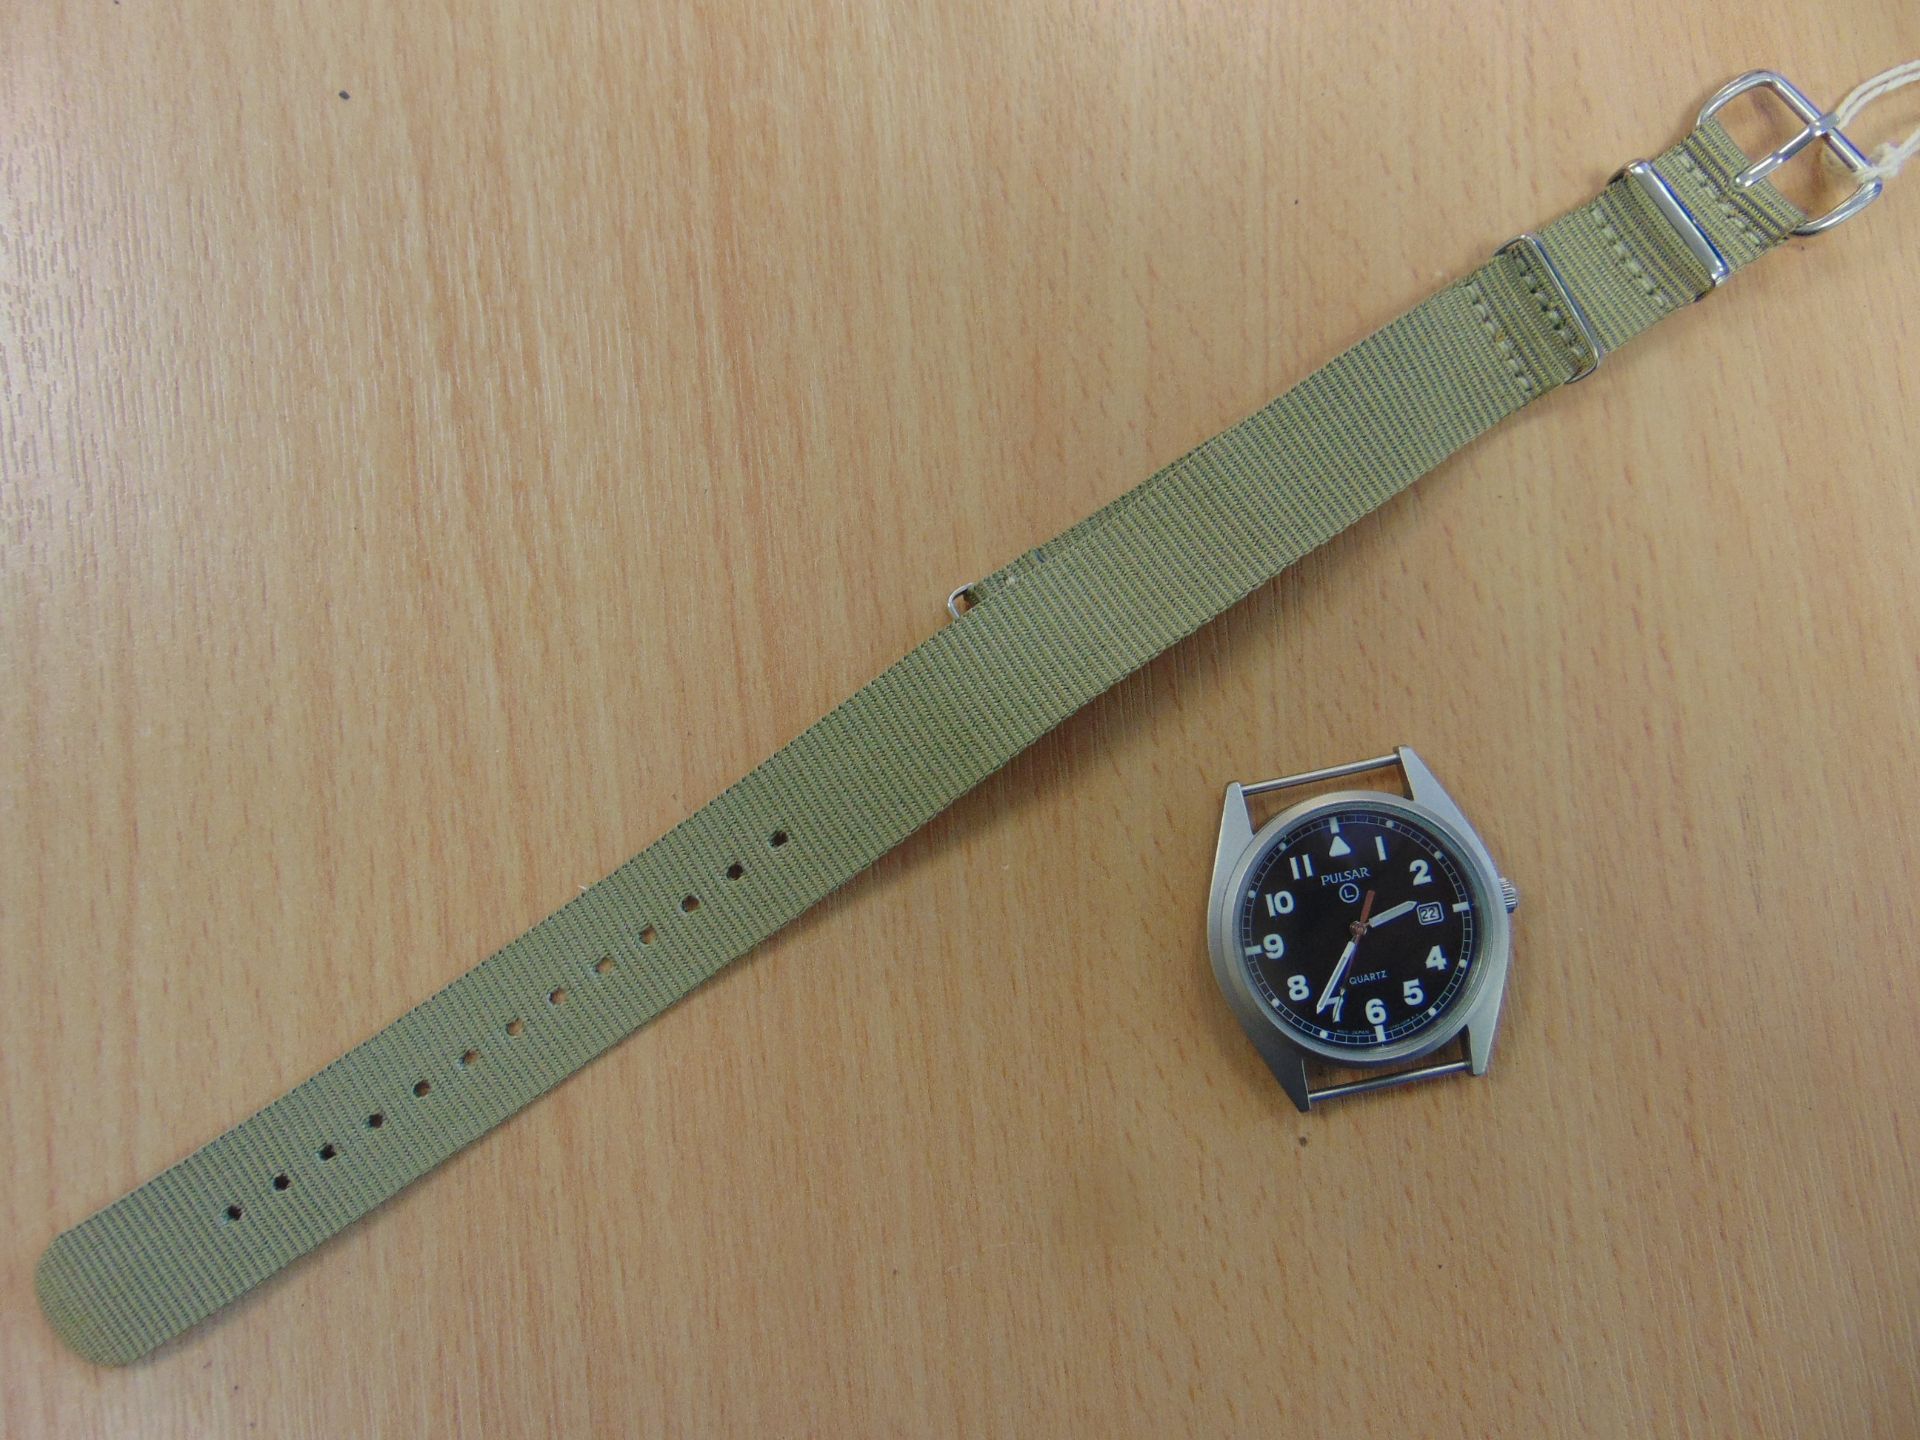 UNISSUED PULSAR W10 SERVICE WATCH NATO MARKED DATED 1999 ORIGINAL STRAP AND NEW BATTERY - Image 12 of 12